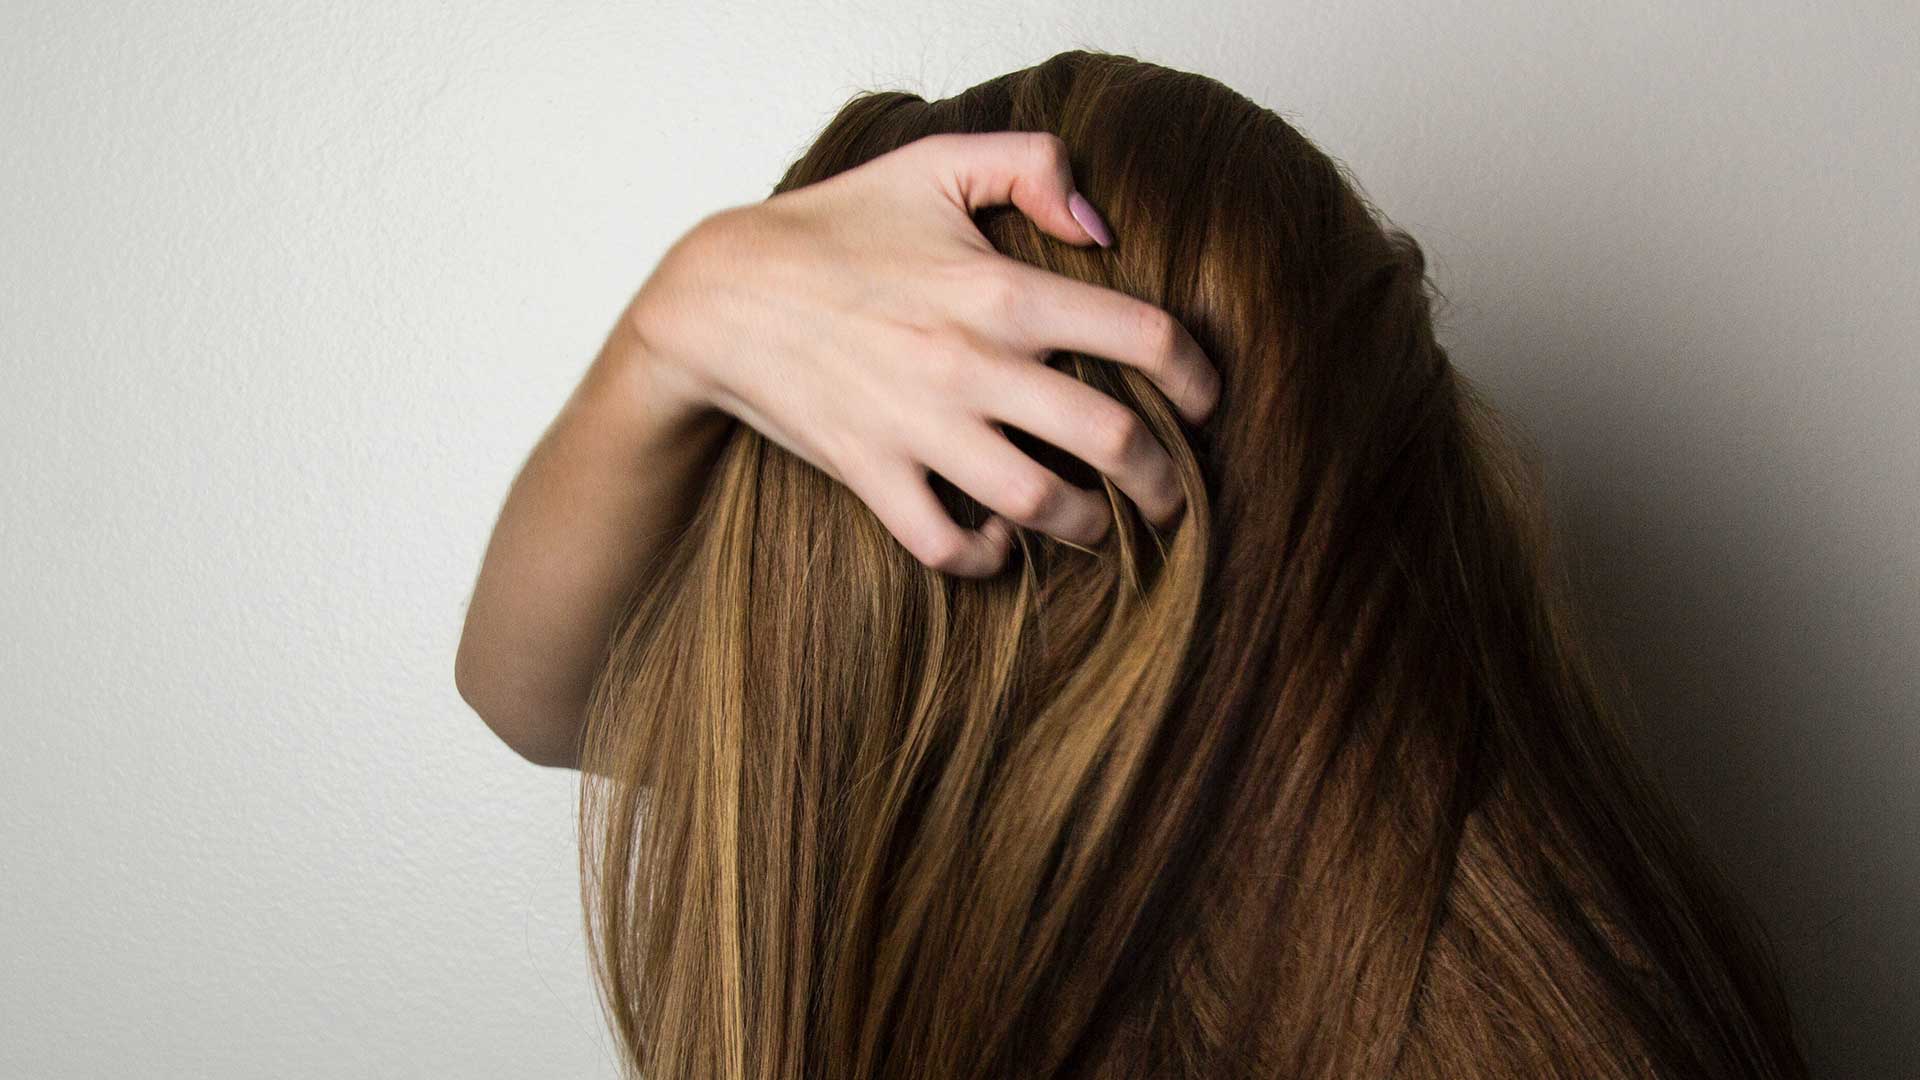 Question: What are some of the most common causes of Hair Loss?